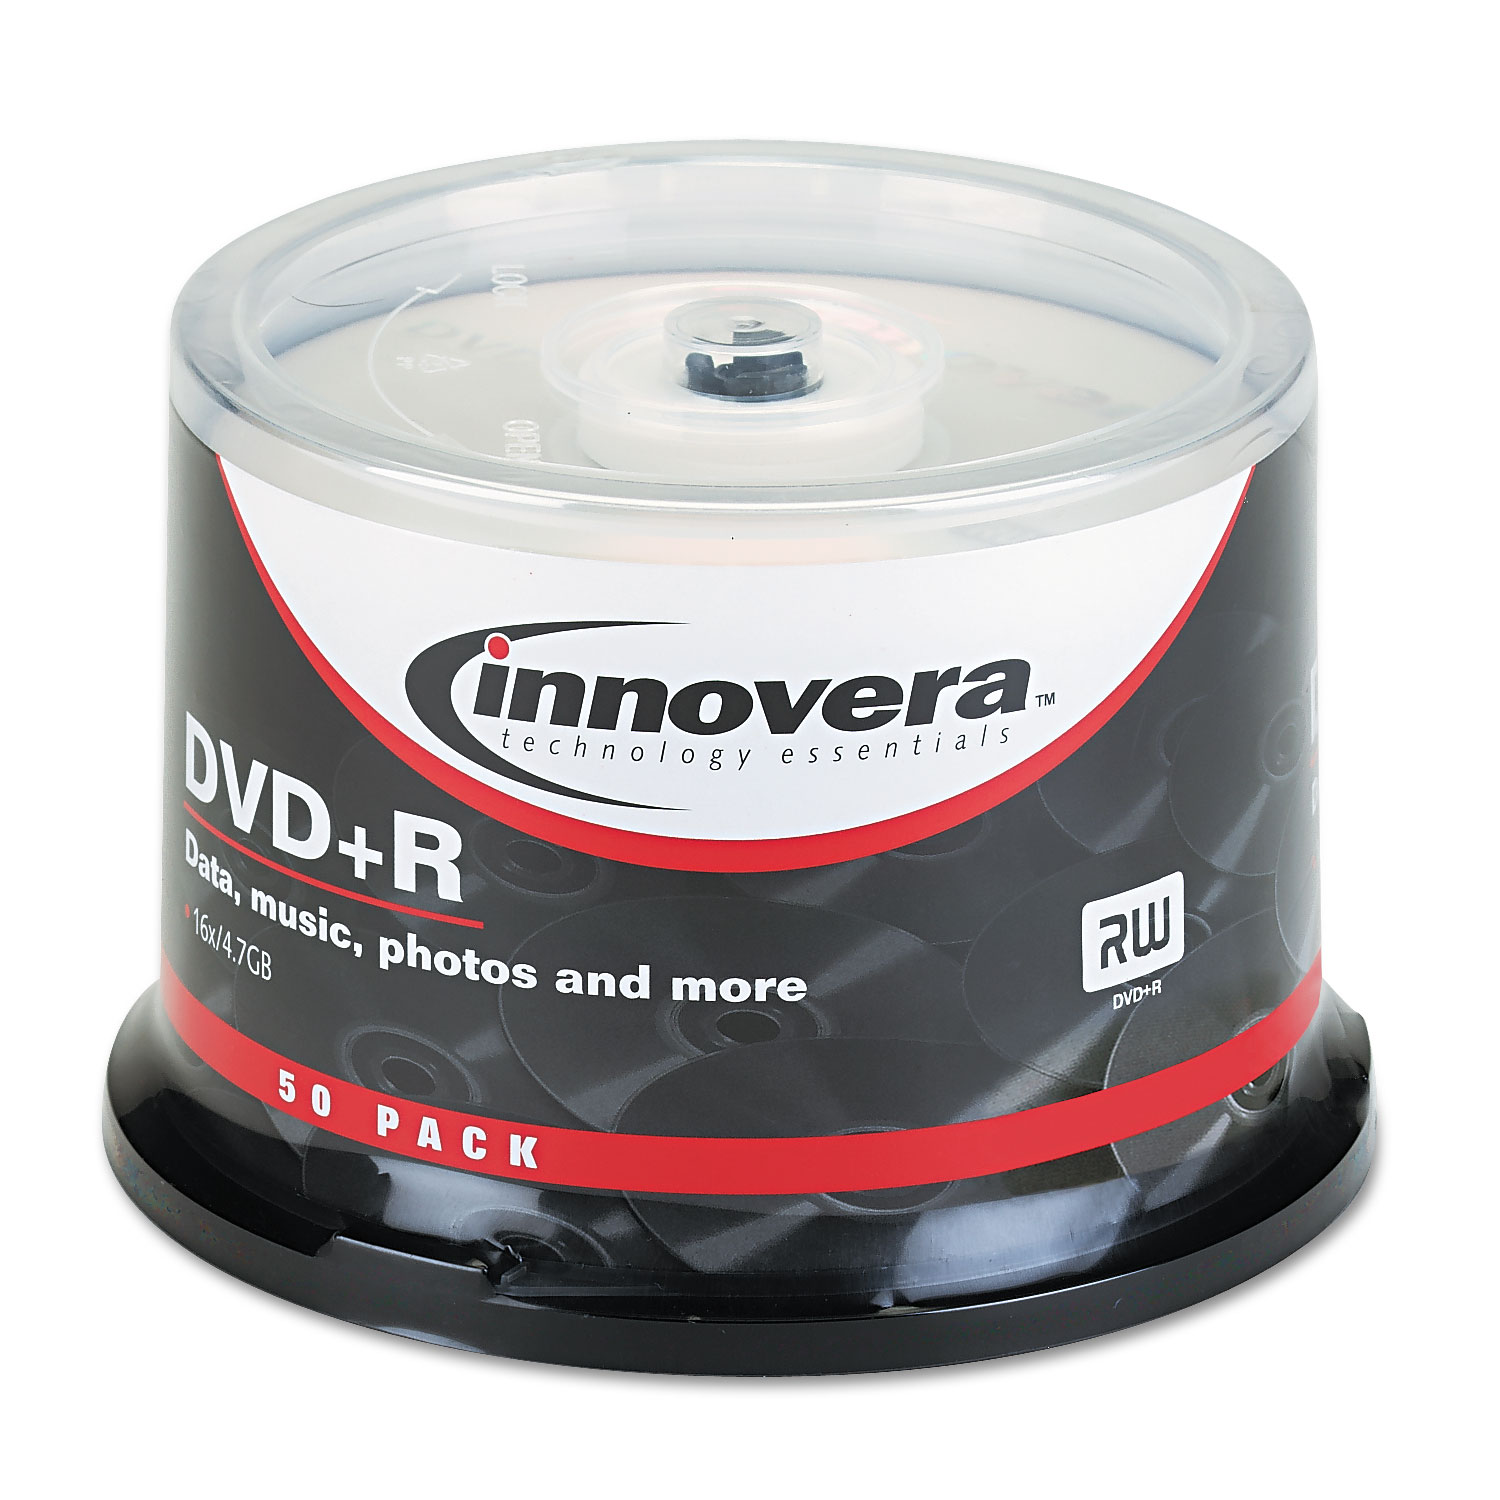  Innovera IVR46851 DVD+R Discs, 4.7GB, 16x, Spindle, Silver, 50/Pack (IVR46851) 